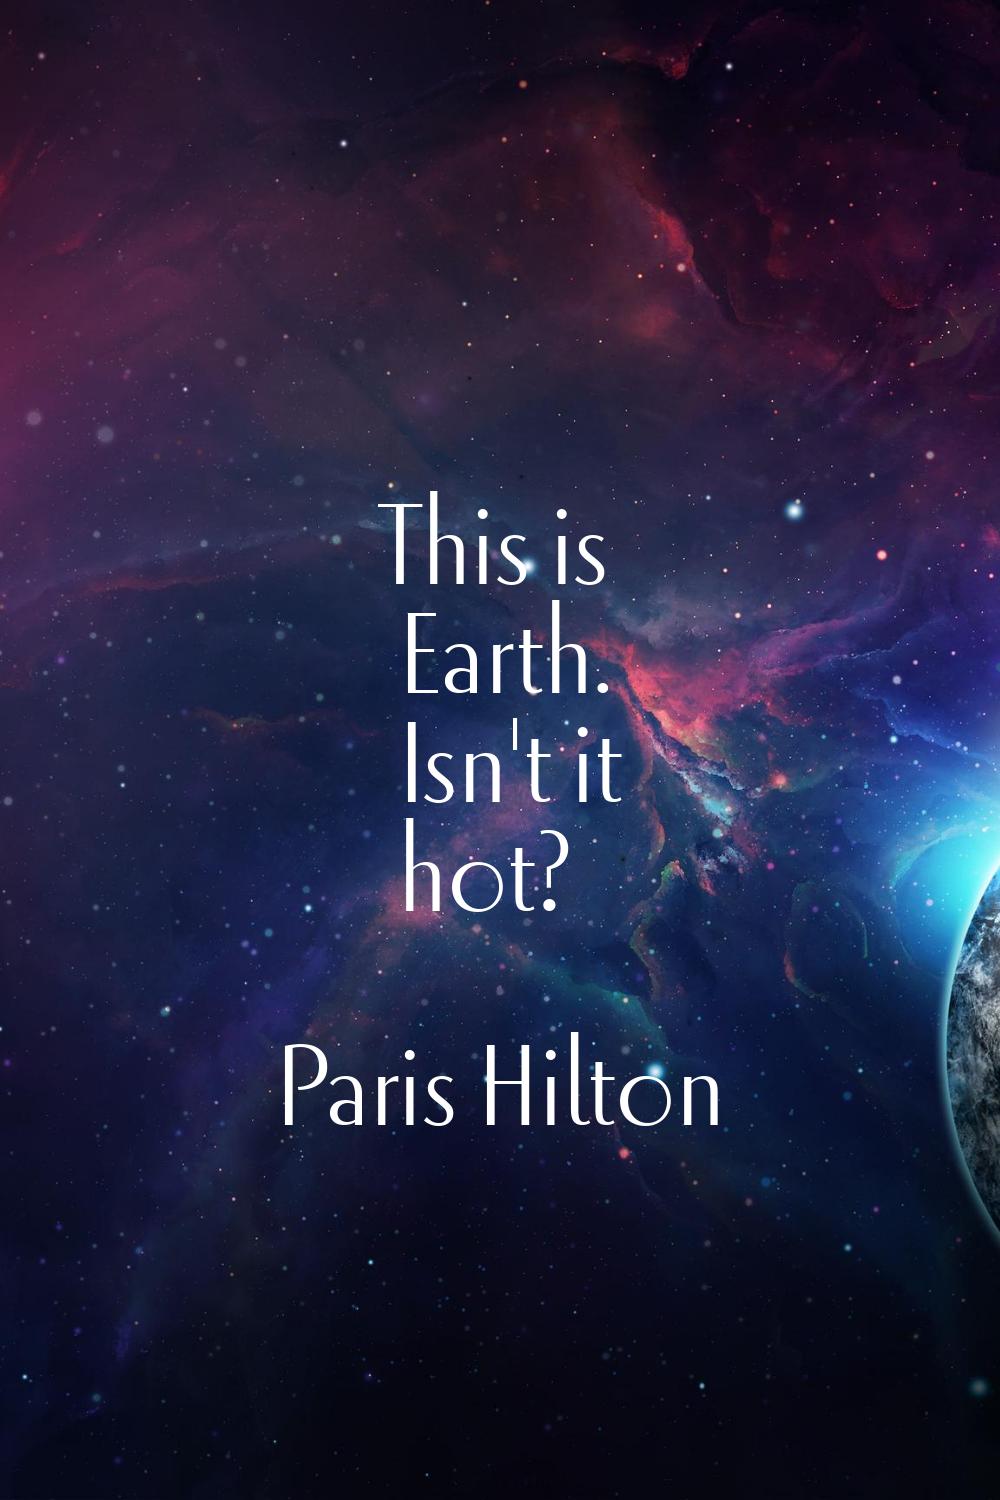 This is Earth. Isn't it hot?